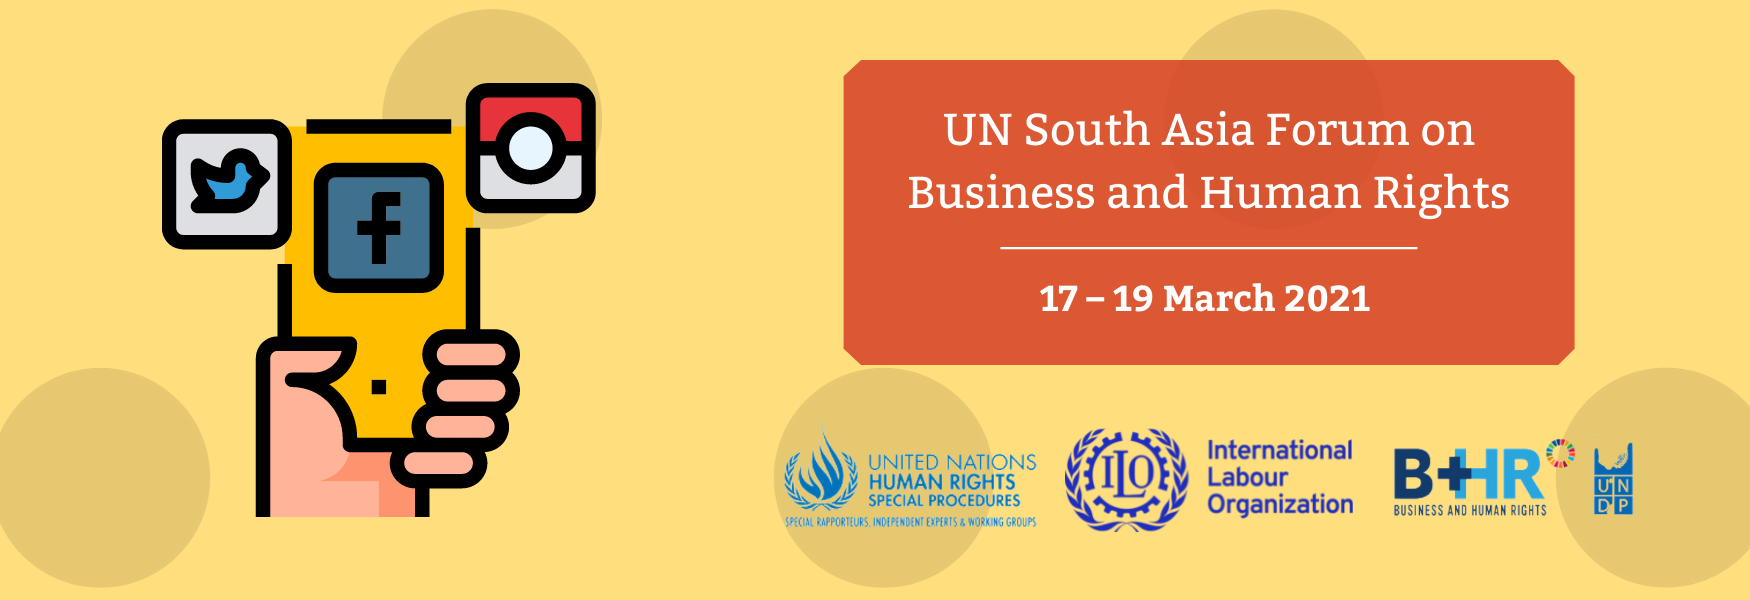 2nd UN South Asian Forum on Business and Human Rights 2021